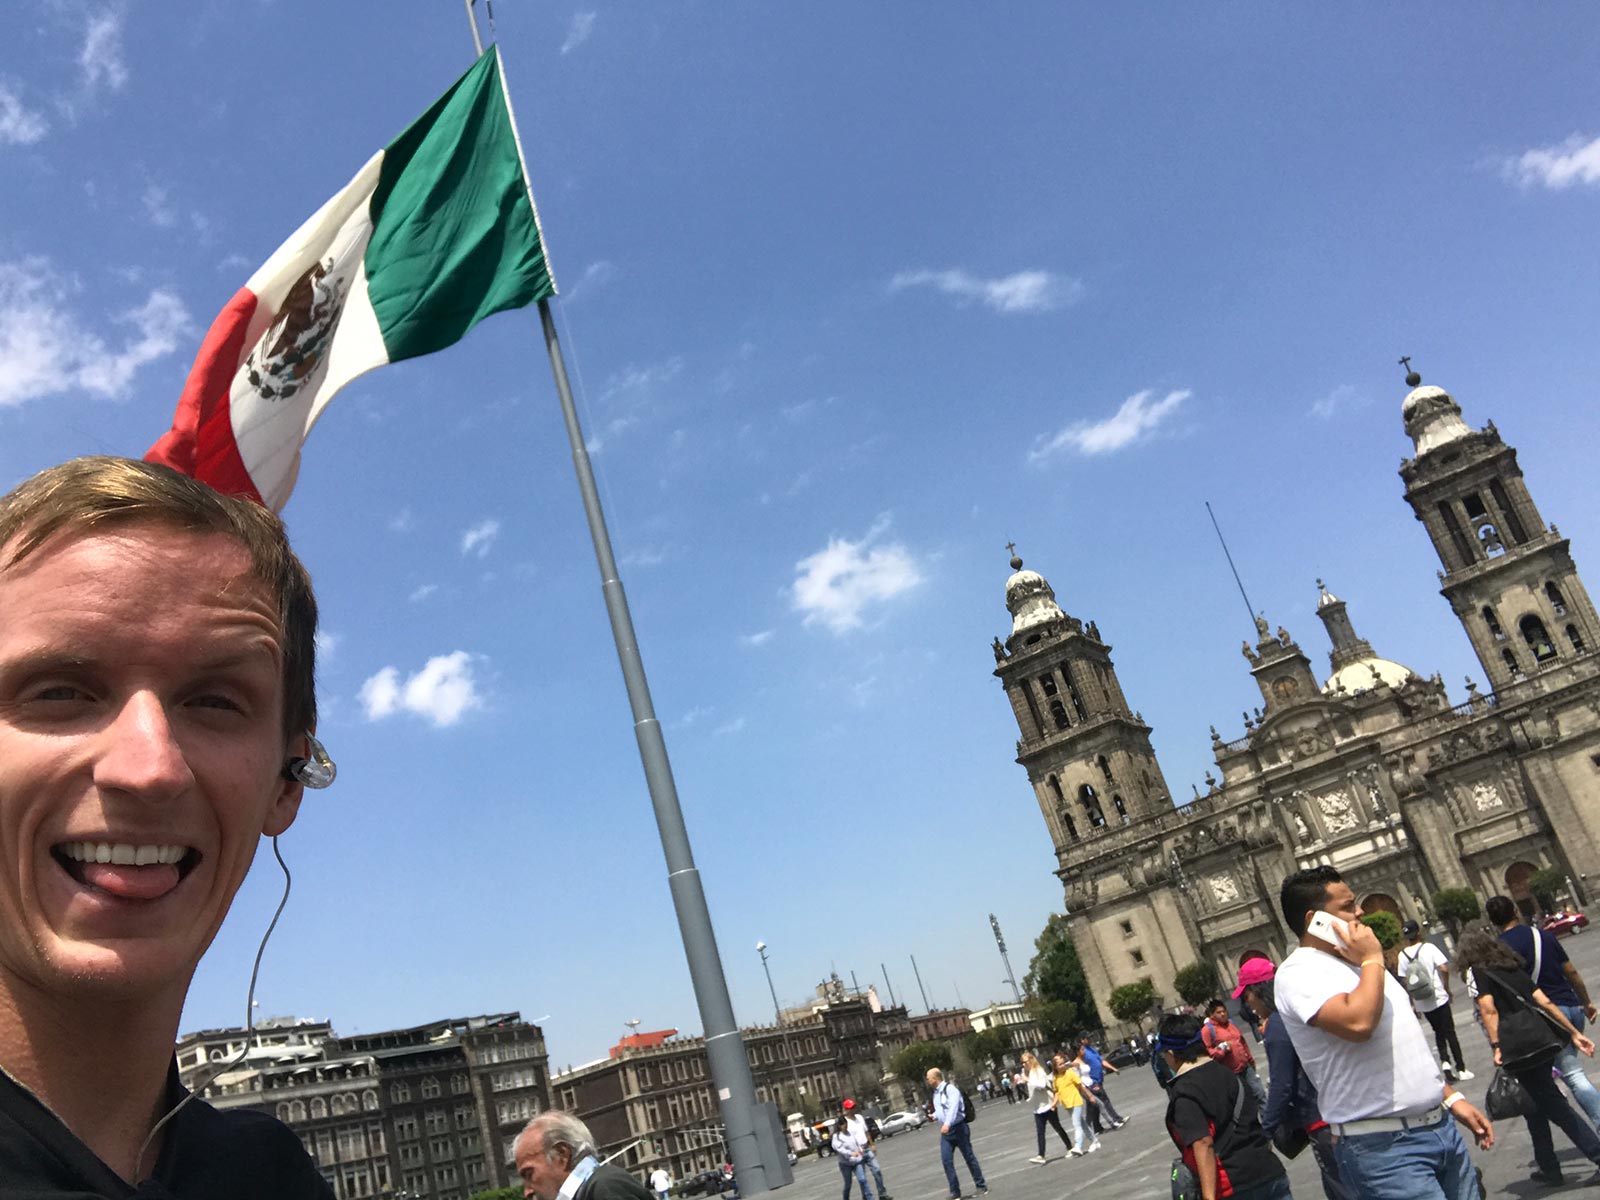 David Simpson with Mexican flag and cathedral in Tenochtitlanin, Mexico. Mexico City & Teotihuacan